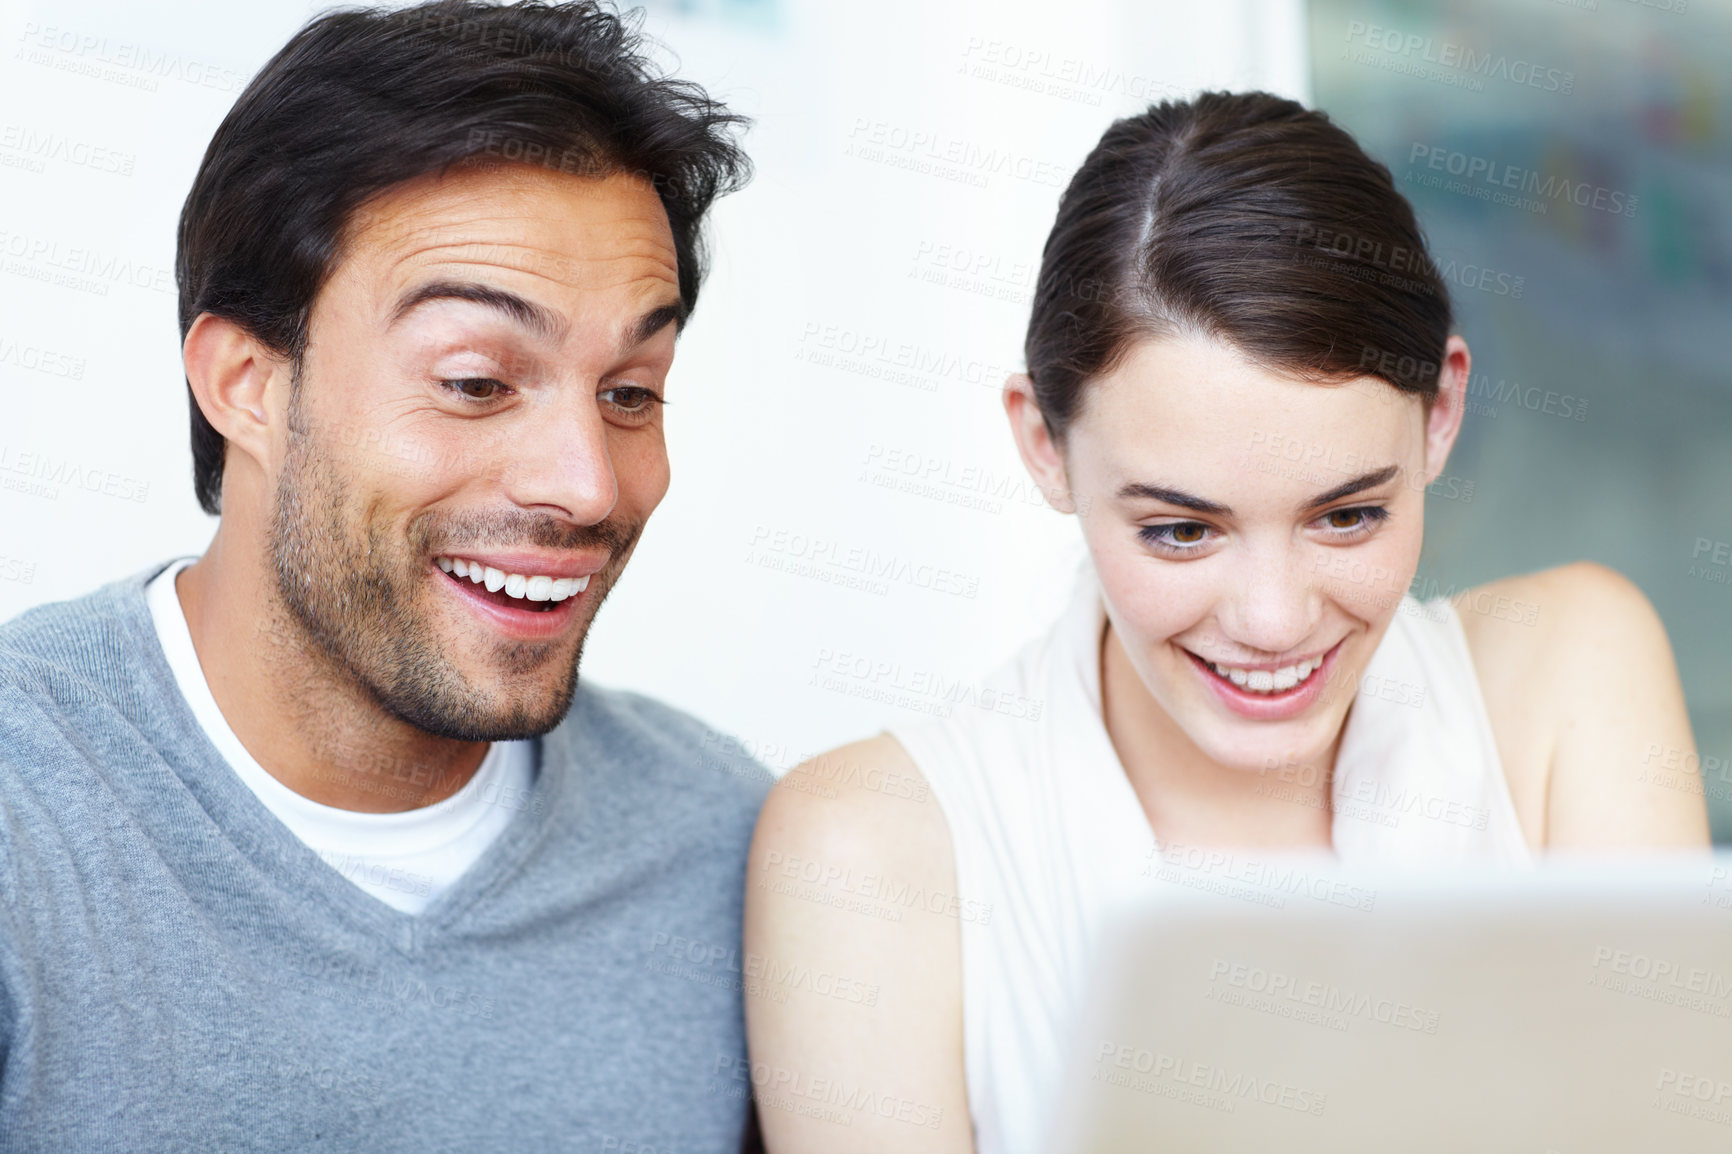 Buy stock photo A handsome man and a beautiful young woman working together on a laptop